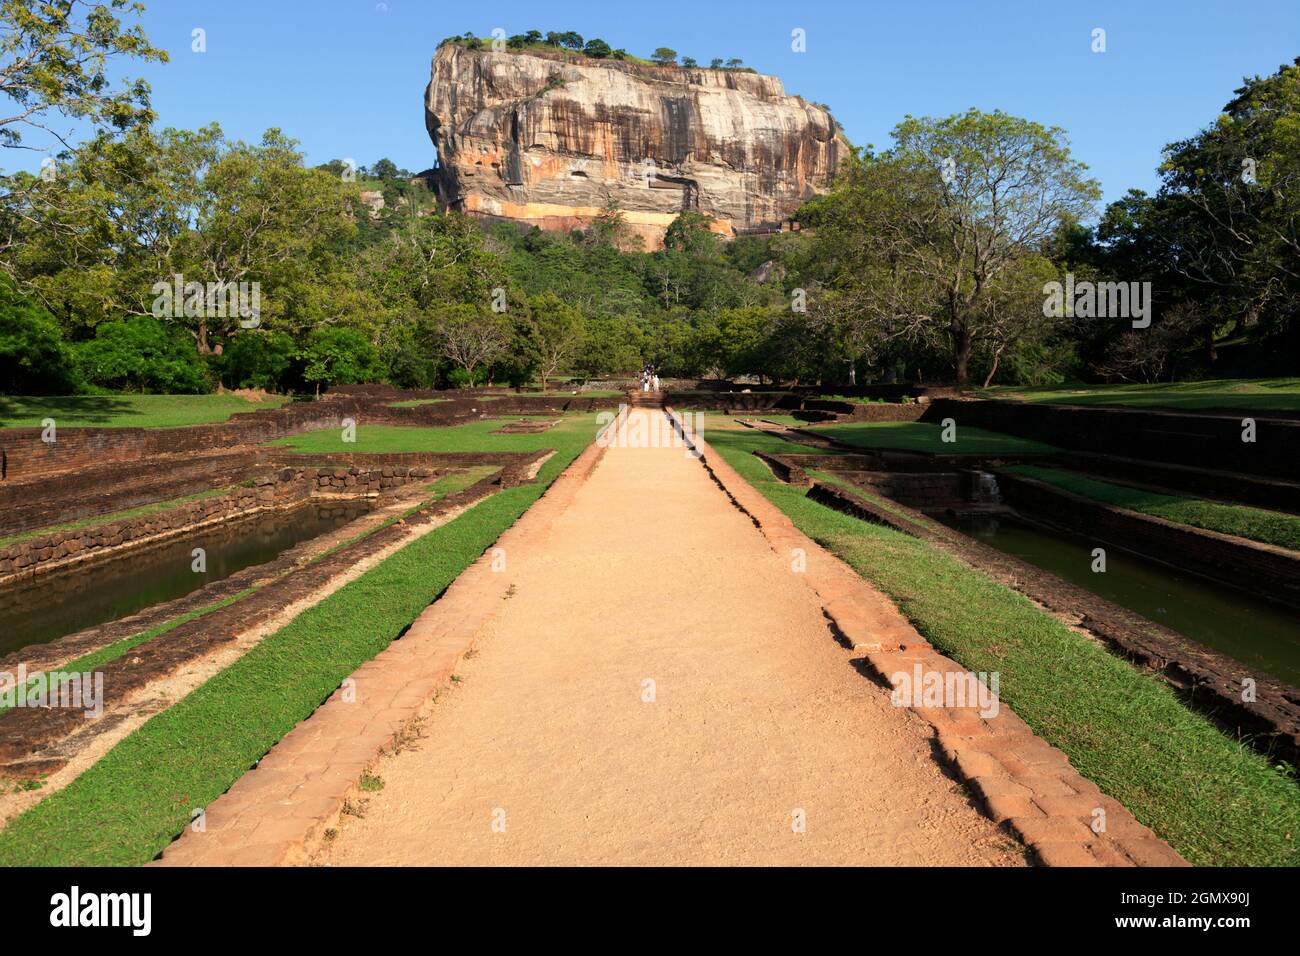 Sigiriya is an ancient palace located in the central Matale District near the town of Dambulla in the Central Province, Sri Lanka. The whole area is d Stock Photo